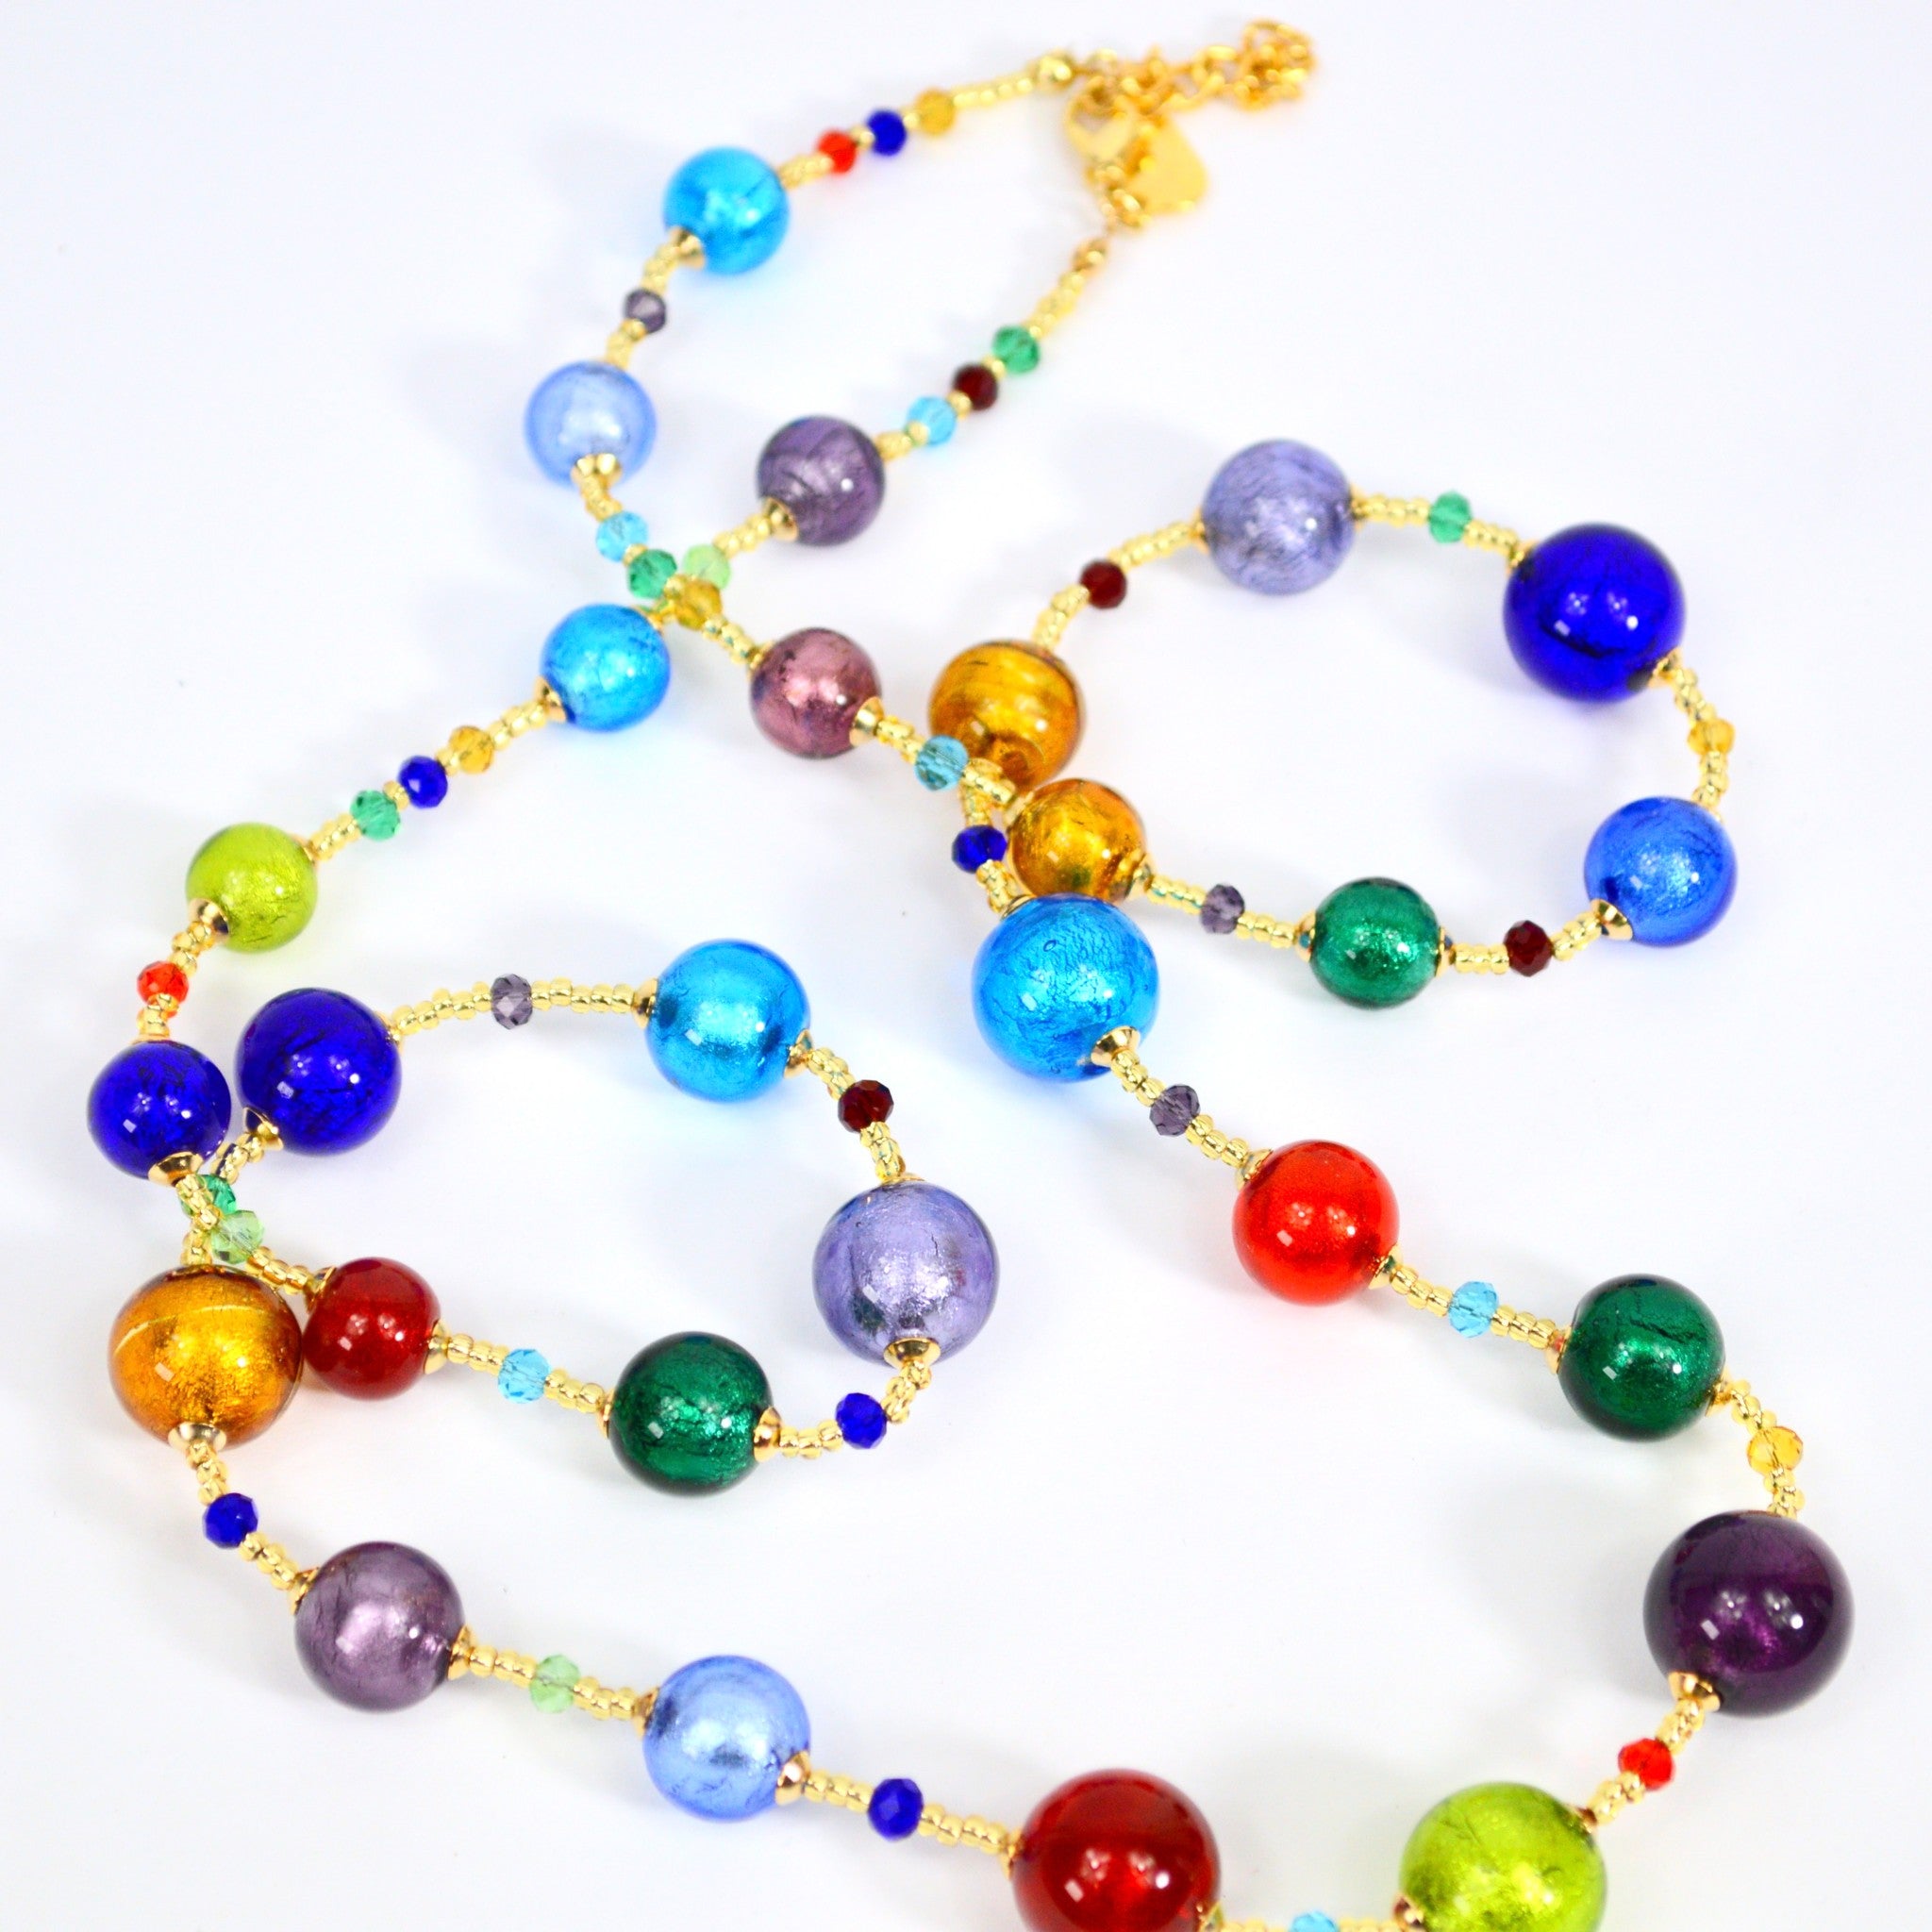 Roma Murano Glass Beaded Necklace, Multi-Color Glass Beads, Made in Italy